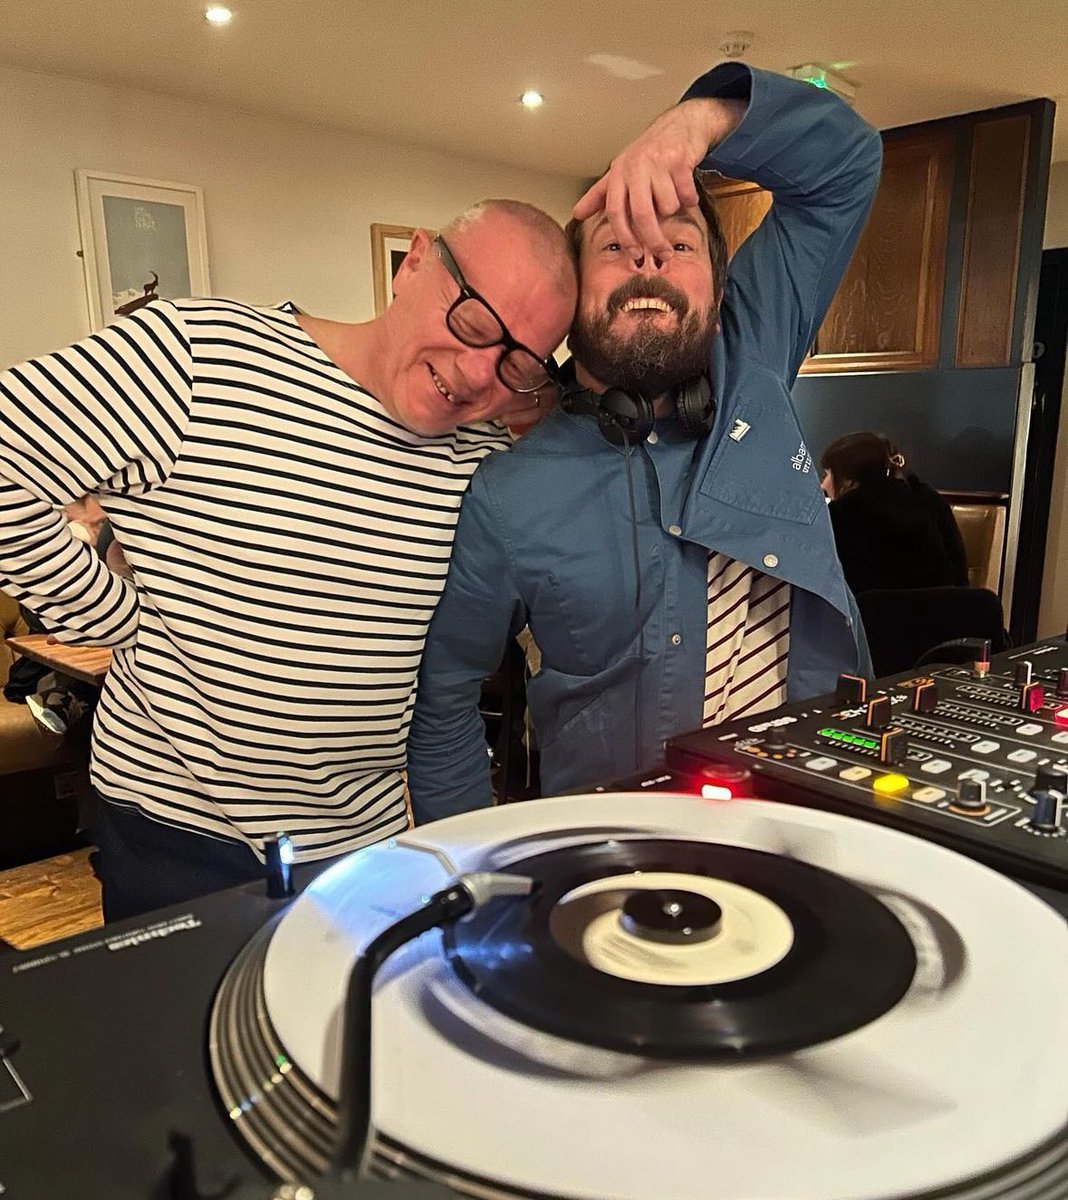 🚨🚨🚨 BREWTAP NEWS 🚨🚨🚨 Always a popular sighting - the irreplaceable, irreplicable Devils Jukebox lads @cmcutandpasted & @fritzgreatlakes will be gracing the decks at the Brewtap on Friday 31st May